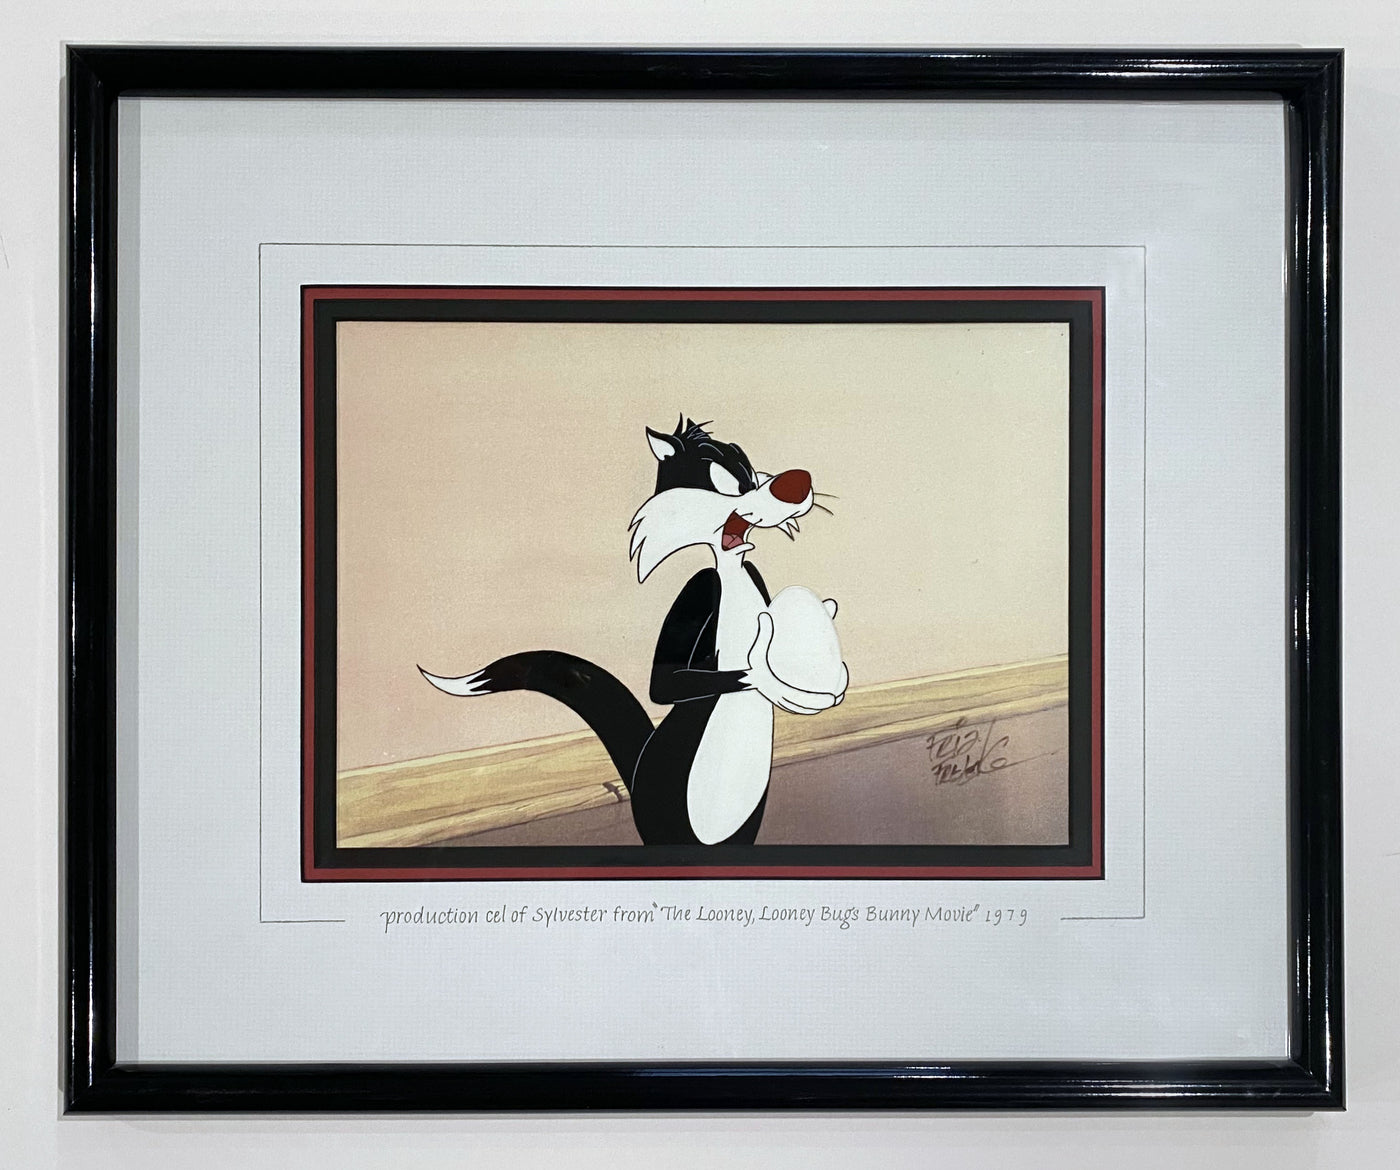 Original Warner Brothers Production Cel of Sylvester from The Looney, Looney Bugs Bunny Movie (1979), Signed by Friz Freleng